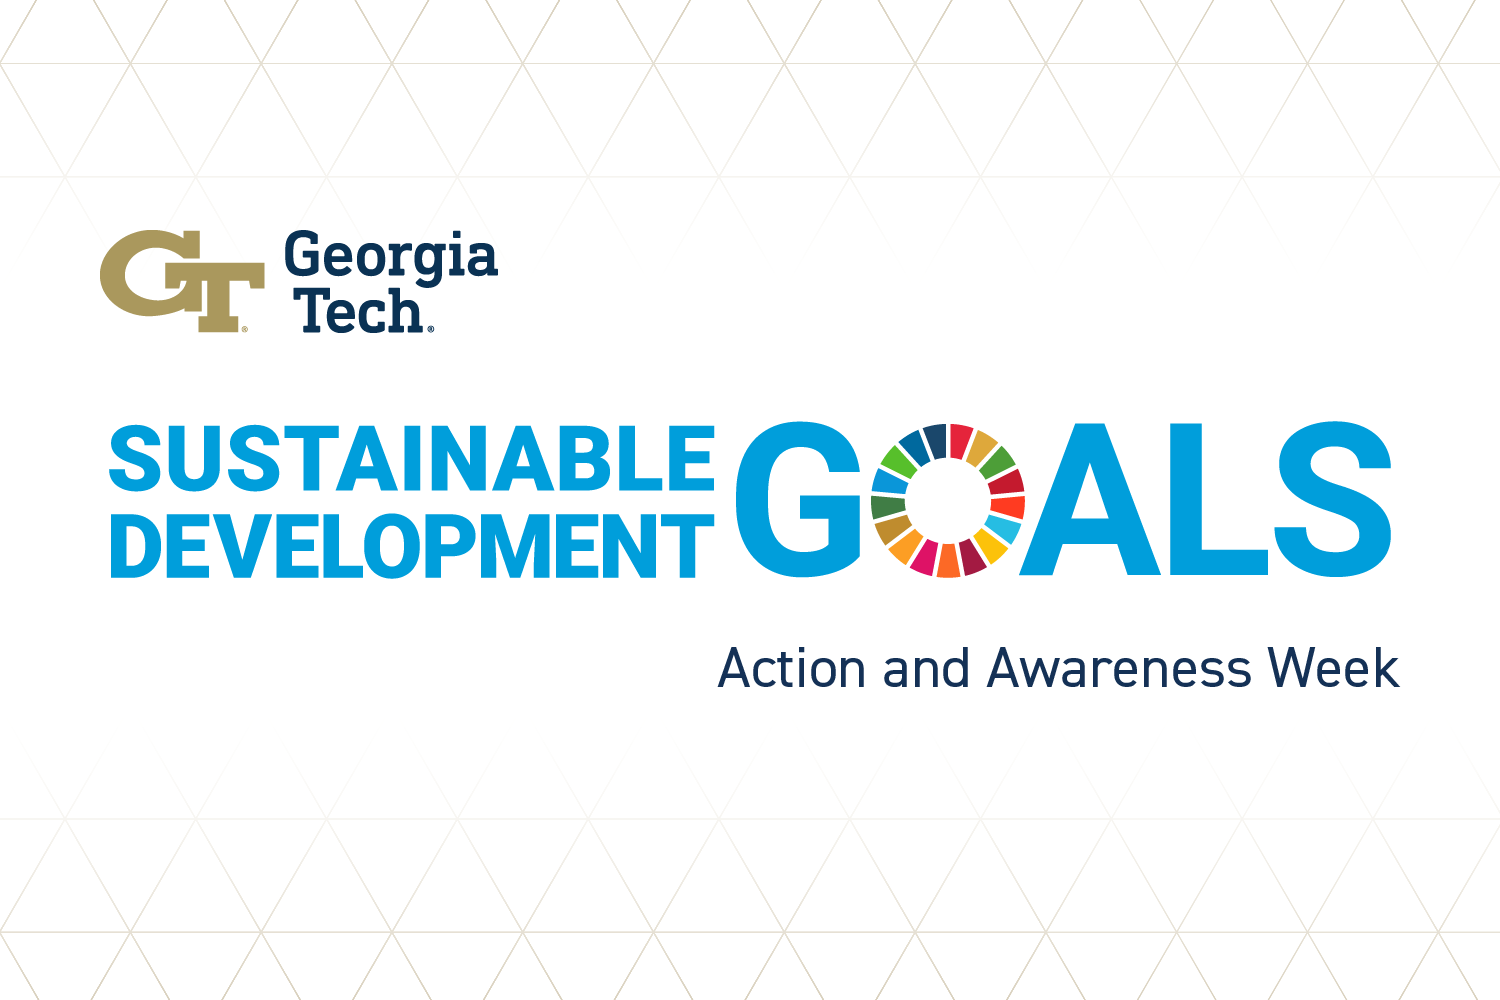 Celebrating the United Nations Sustainable Development Goals (UN SDG) Action and Awareness Week